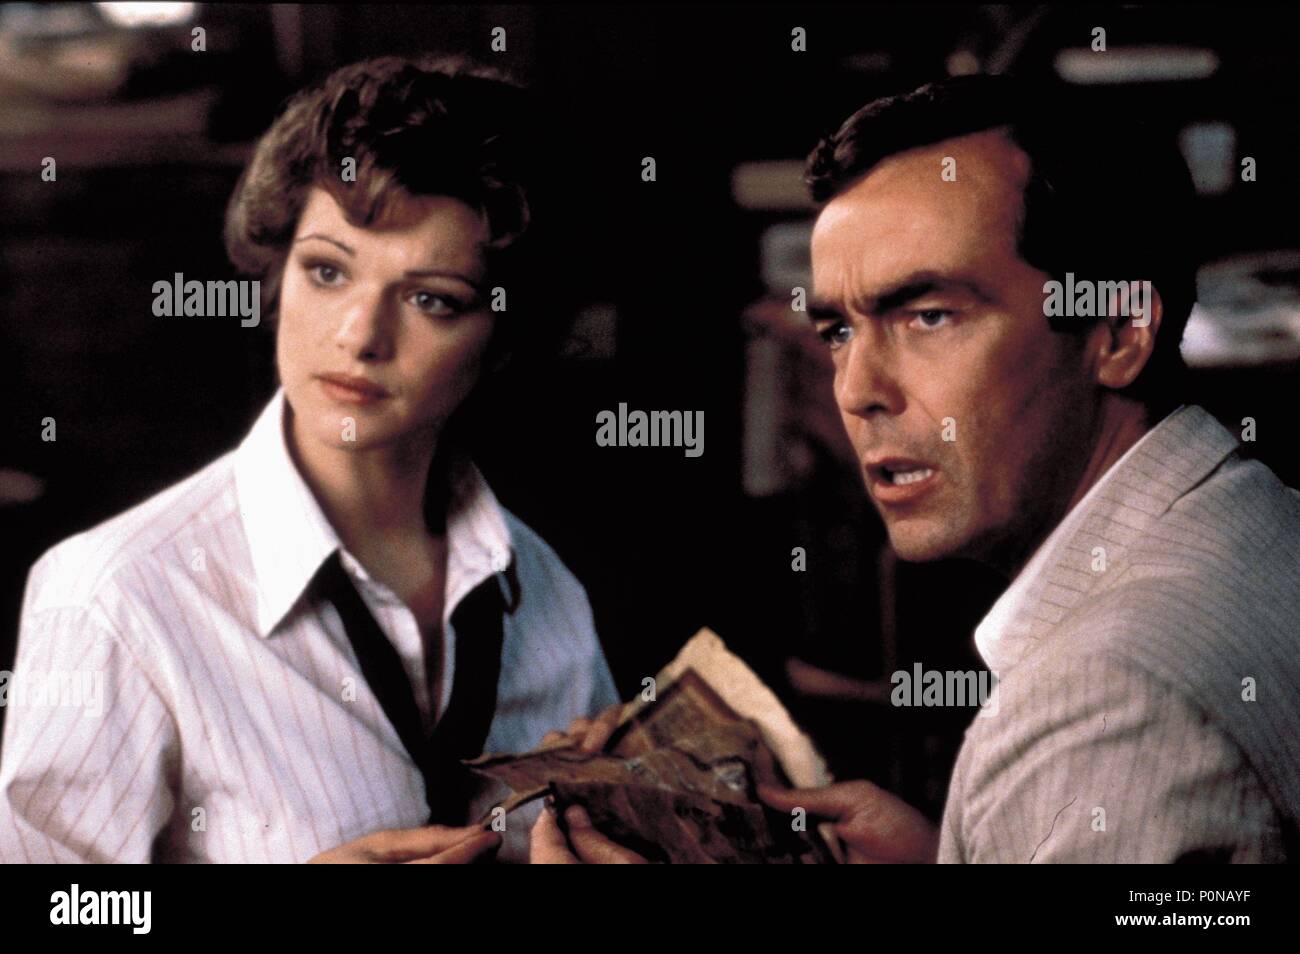 Original Film Title: THE MUMMY.  English Title: THE MUMMY.  Film Director: STEPHEN SOMMERS.  Year: 1999.  Stars: JOHN HANNAH; RACHEL WEISZ. Credit: UNIVERSAL PICTURES / HAMSHERE, KEITH / Album Stock Photo